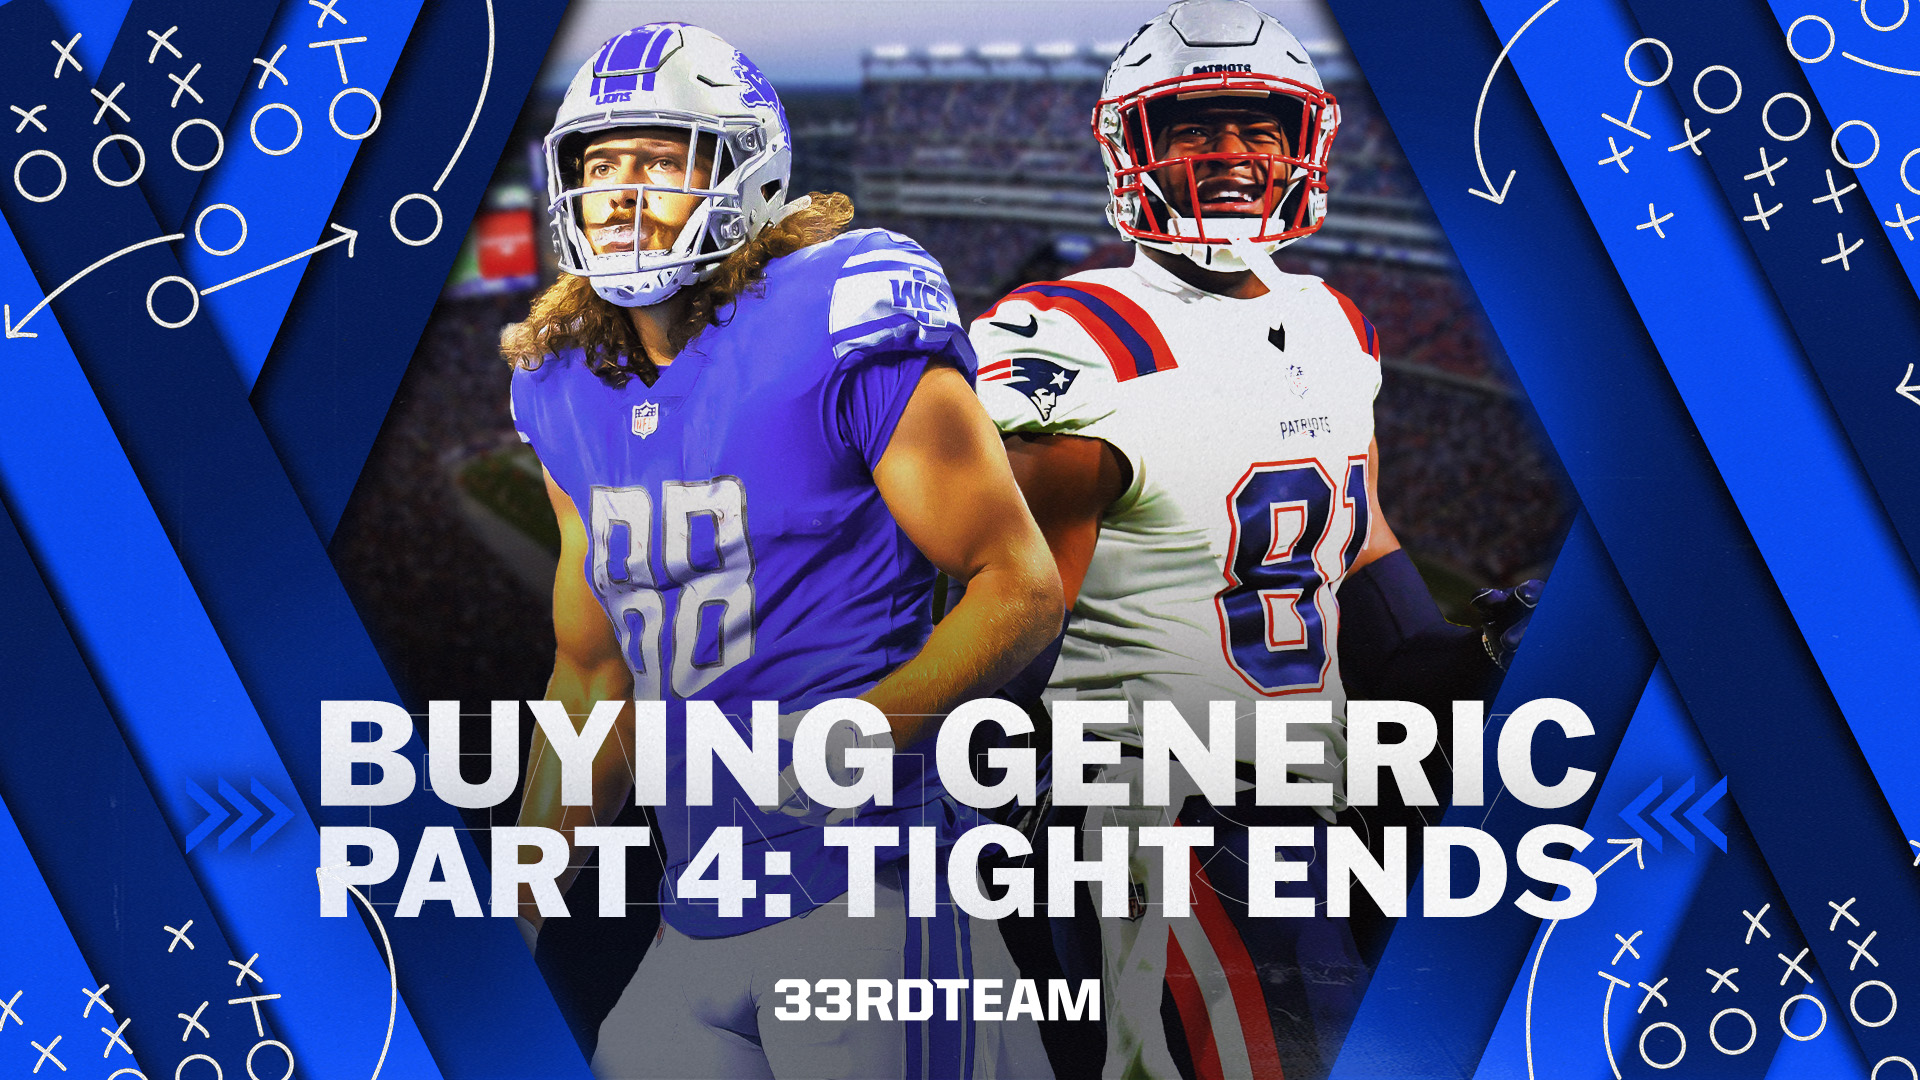 Buying Generic Part 4: Tight End